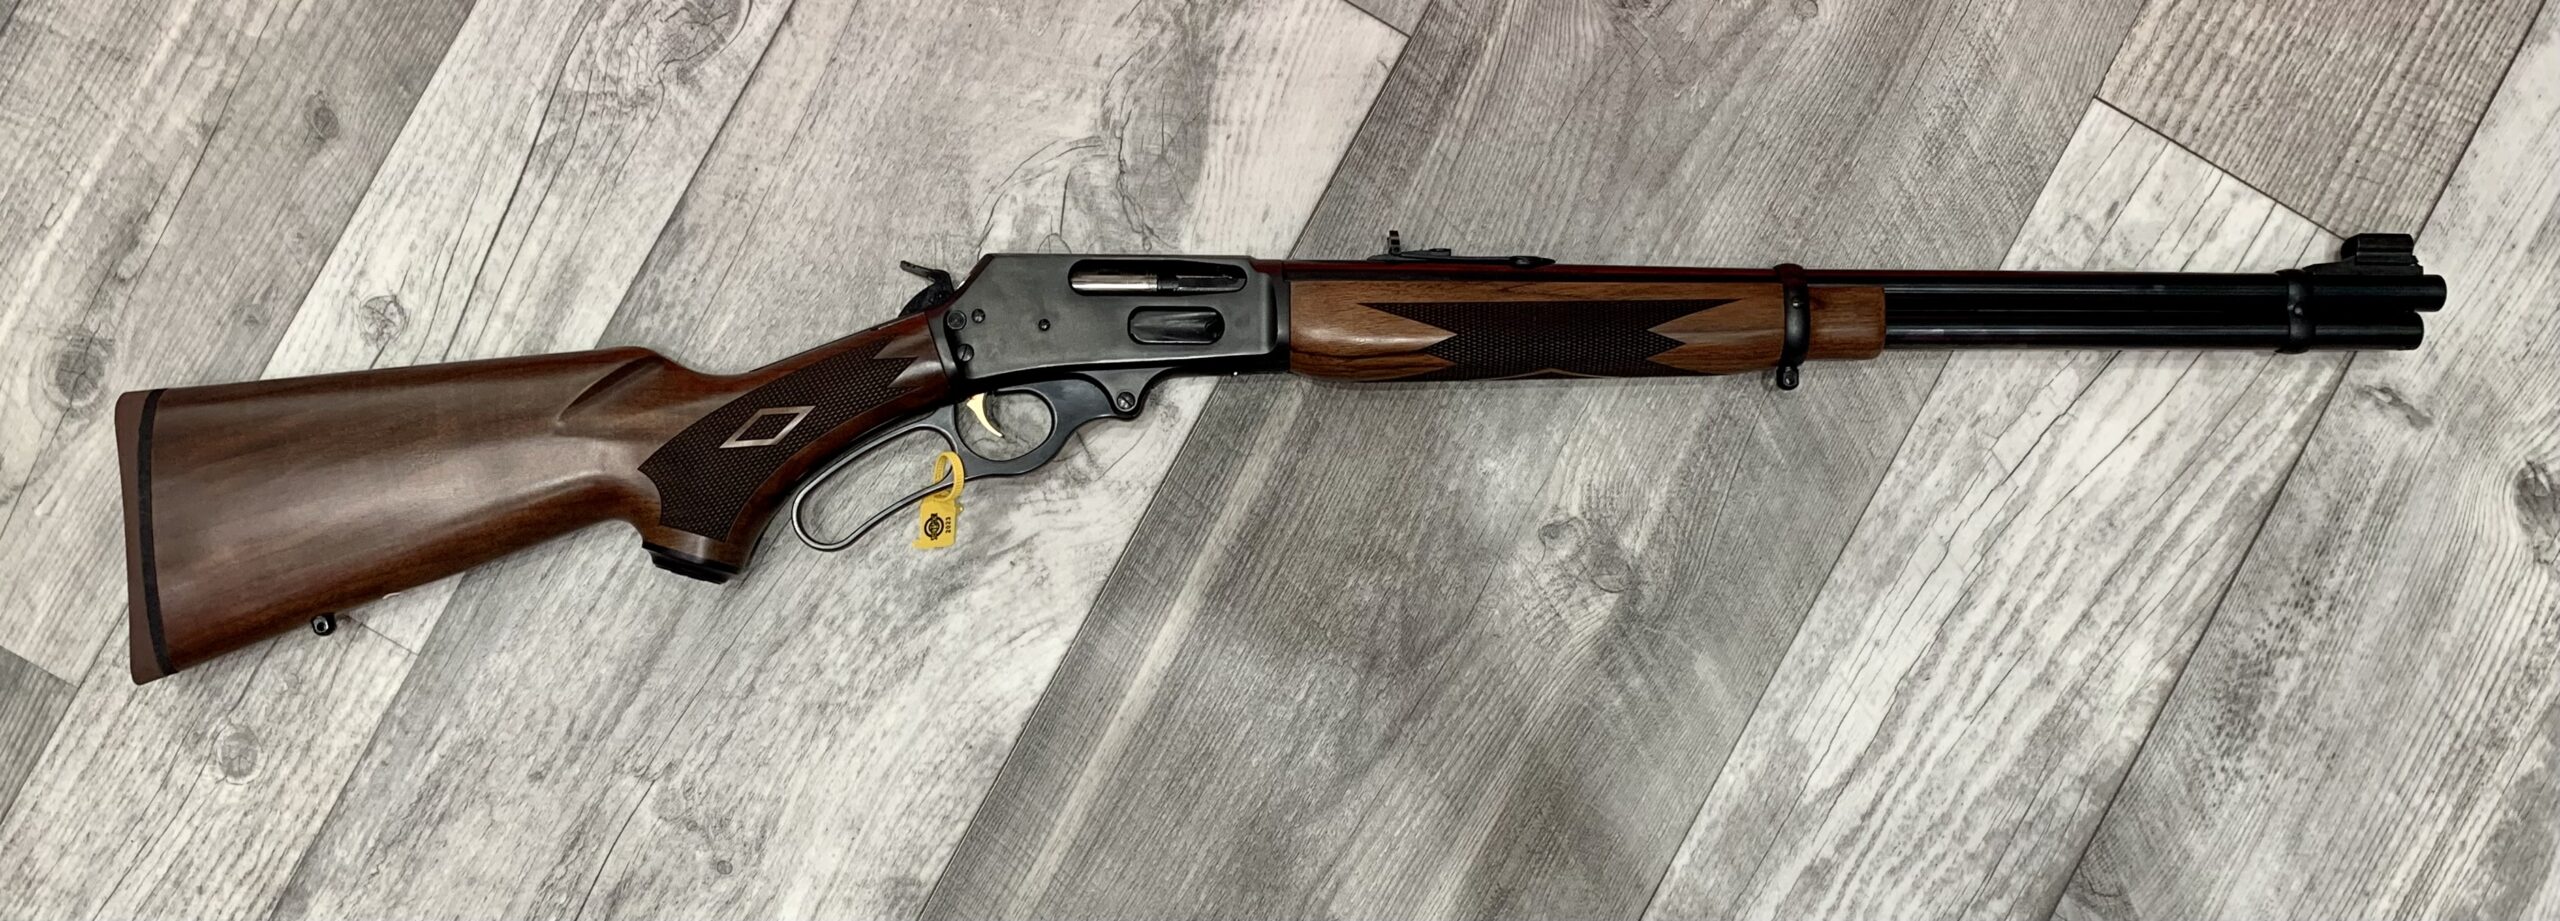 6 Manufacturers Selling Lever-Action Rifles